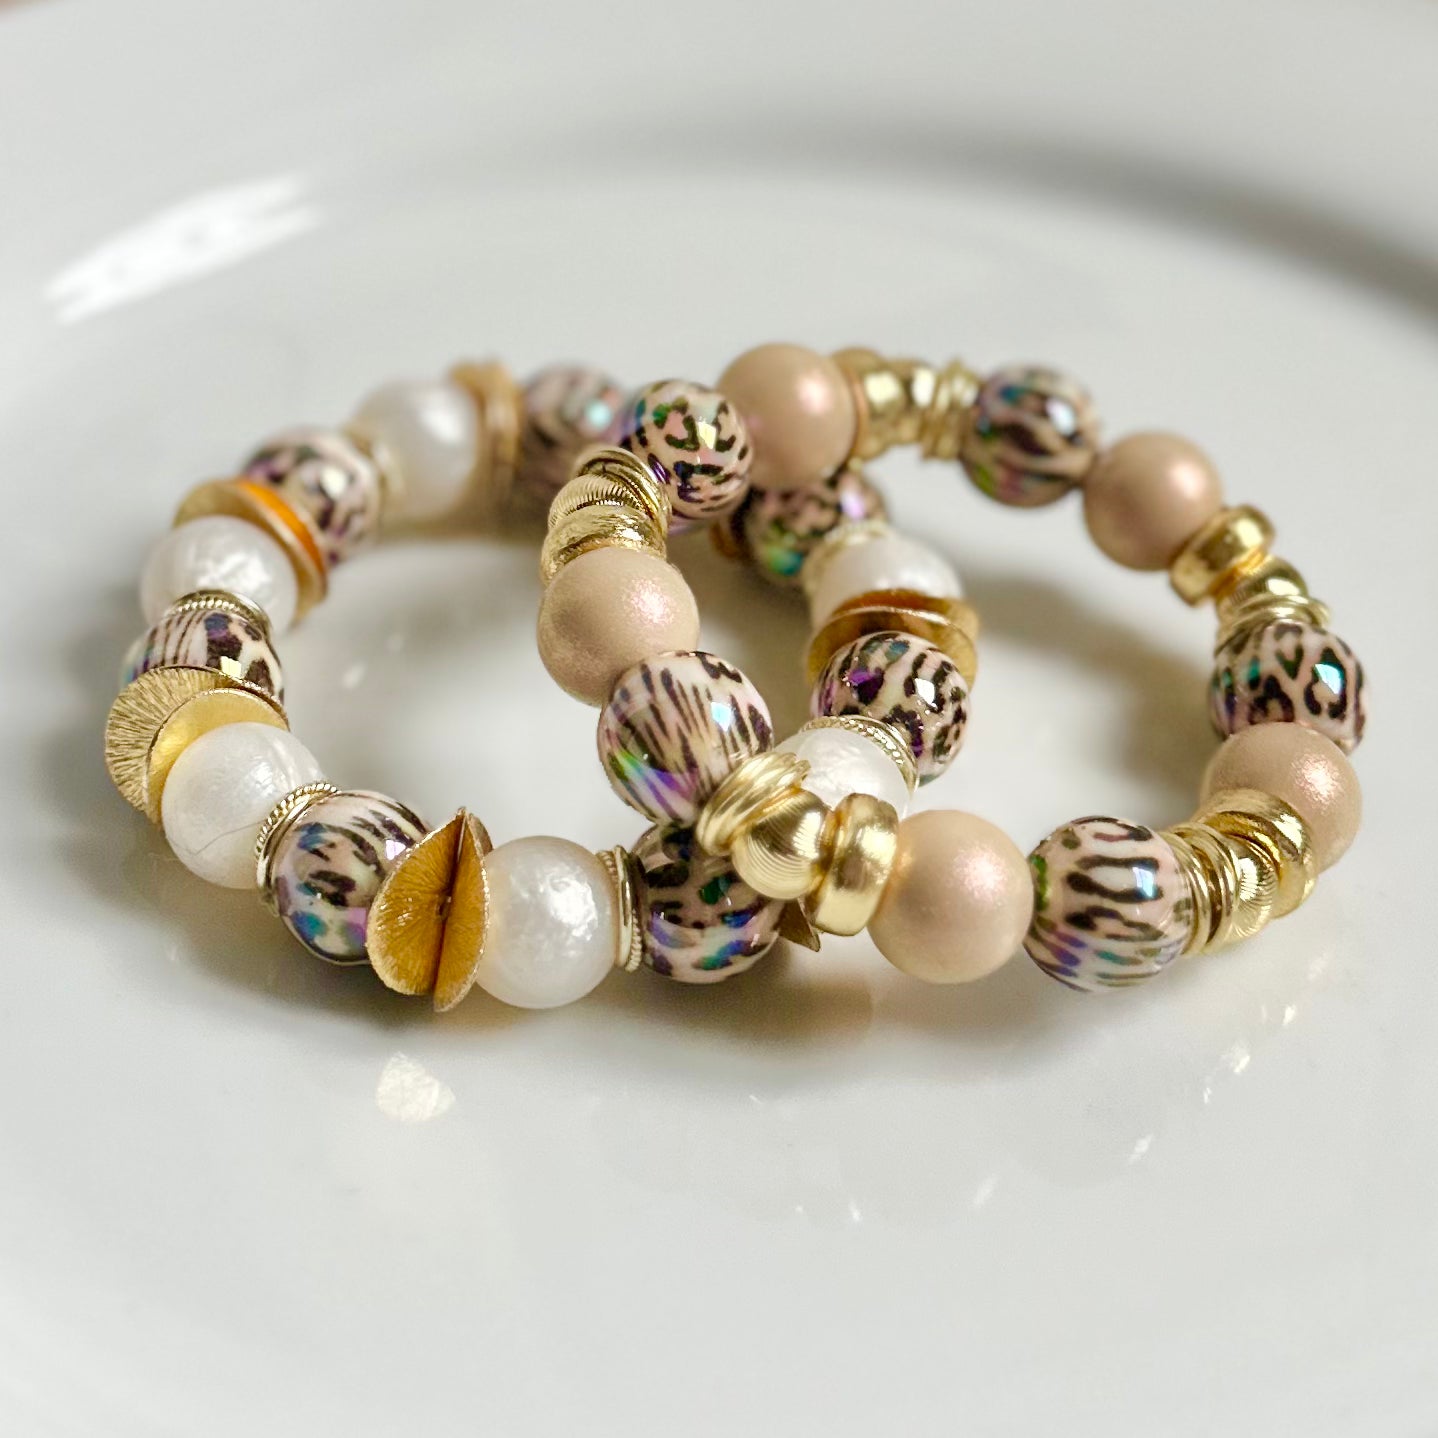 GOLD WAVY DISC, SHINY CHEETAH AND PEARLIZED IVORY STATEMENT BRACELET